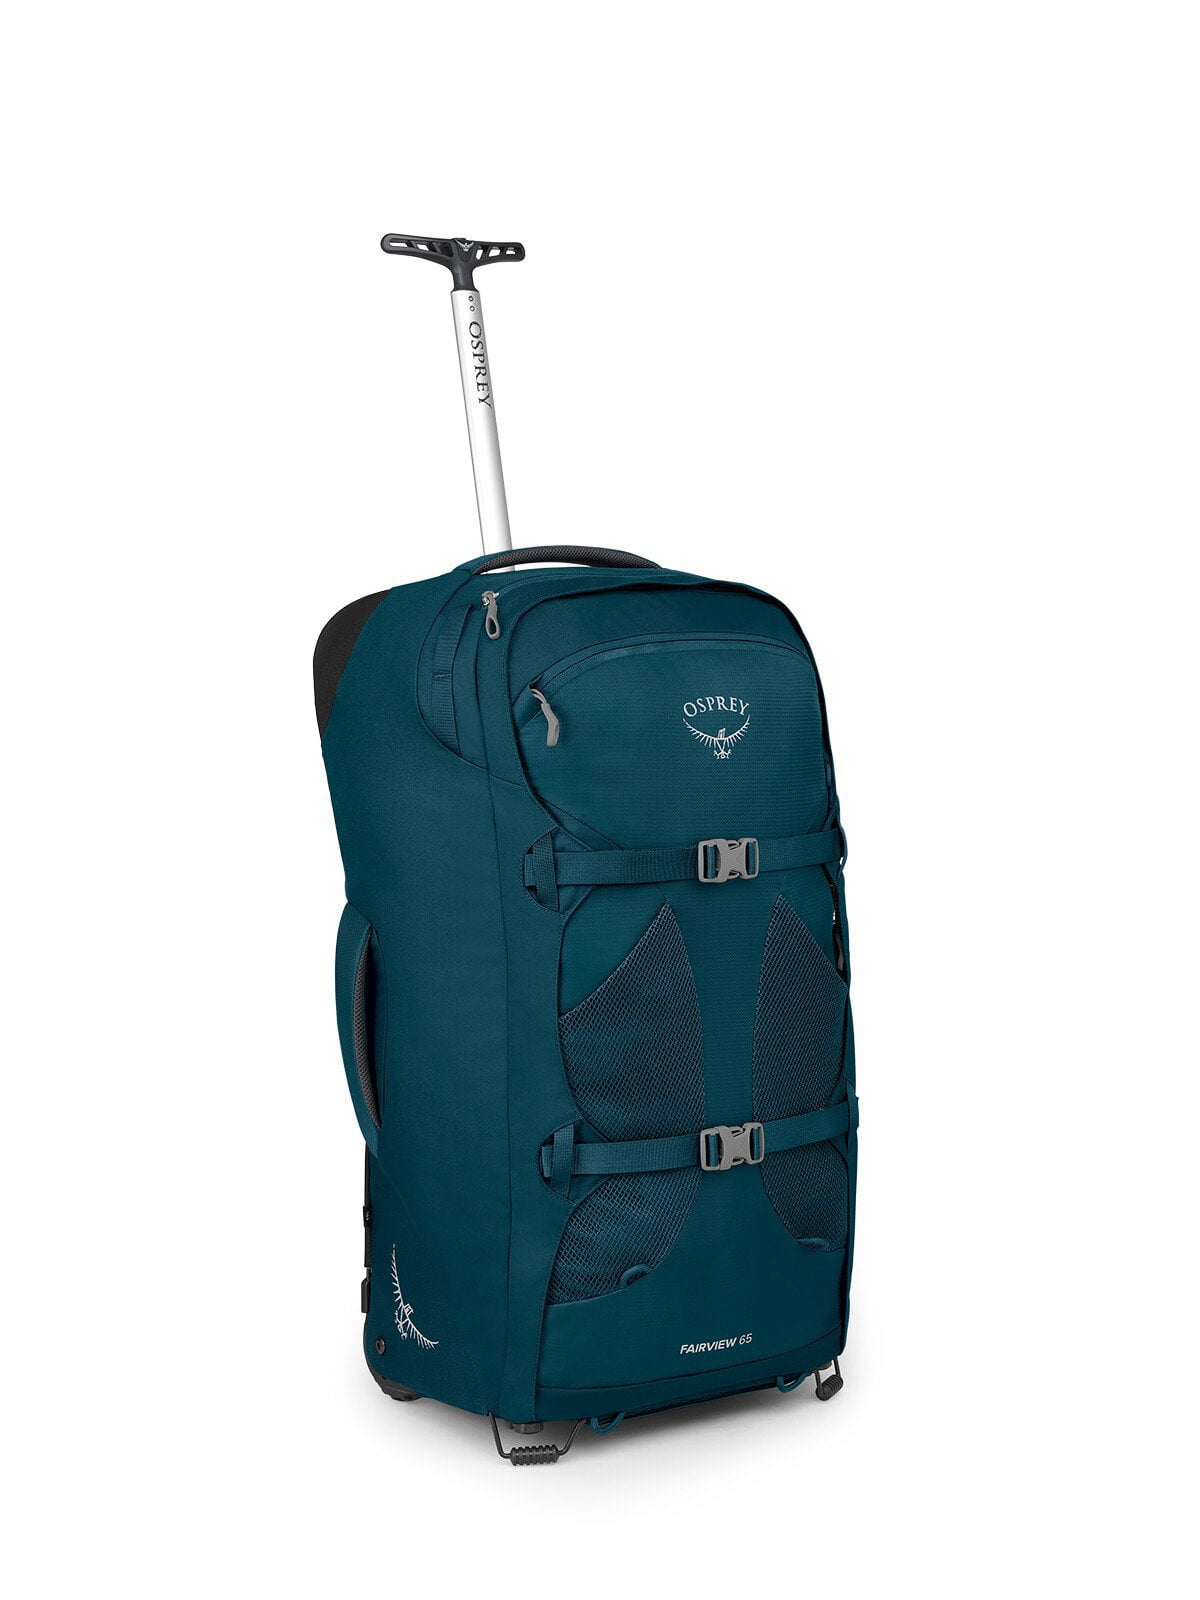 Osprey Fairview Wheeled Travel Pack 65L/27.5"